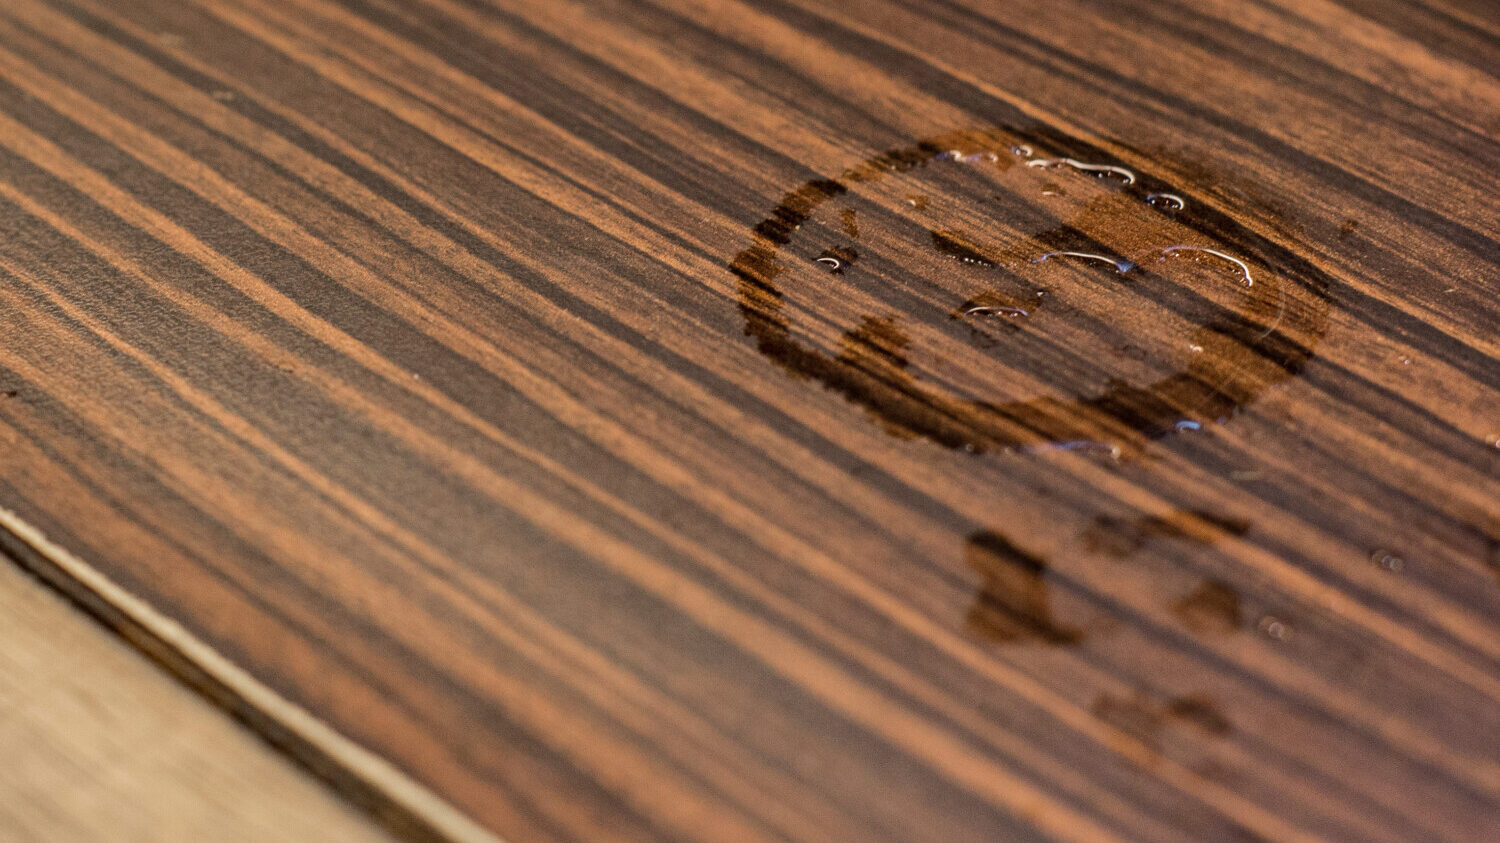 Water mark leaving stain on wood furniture